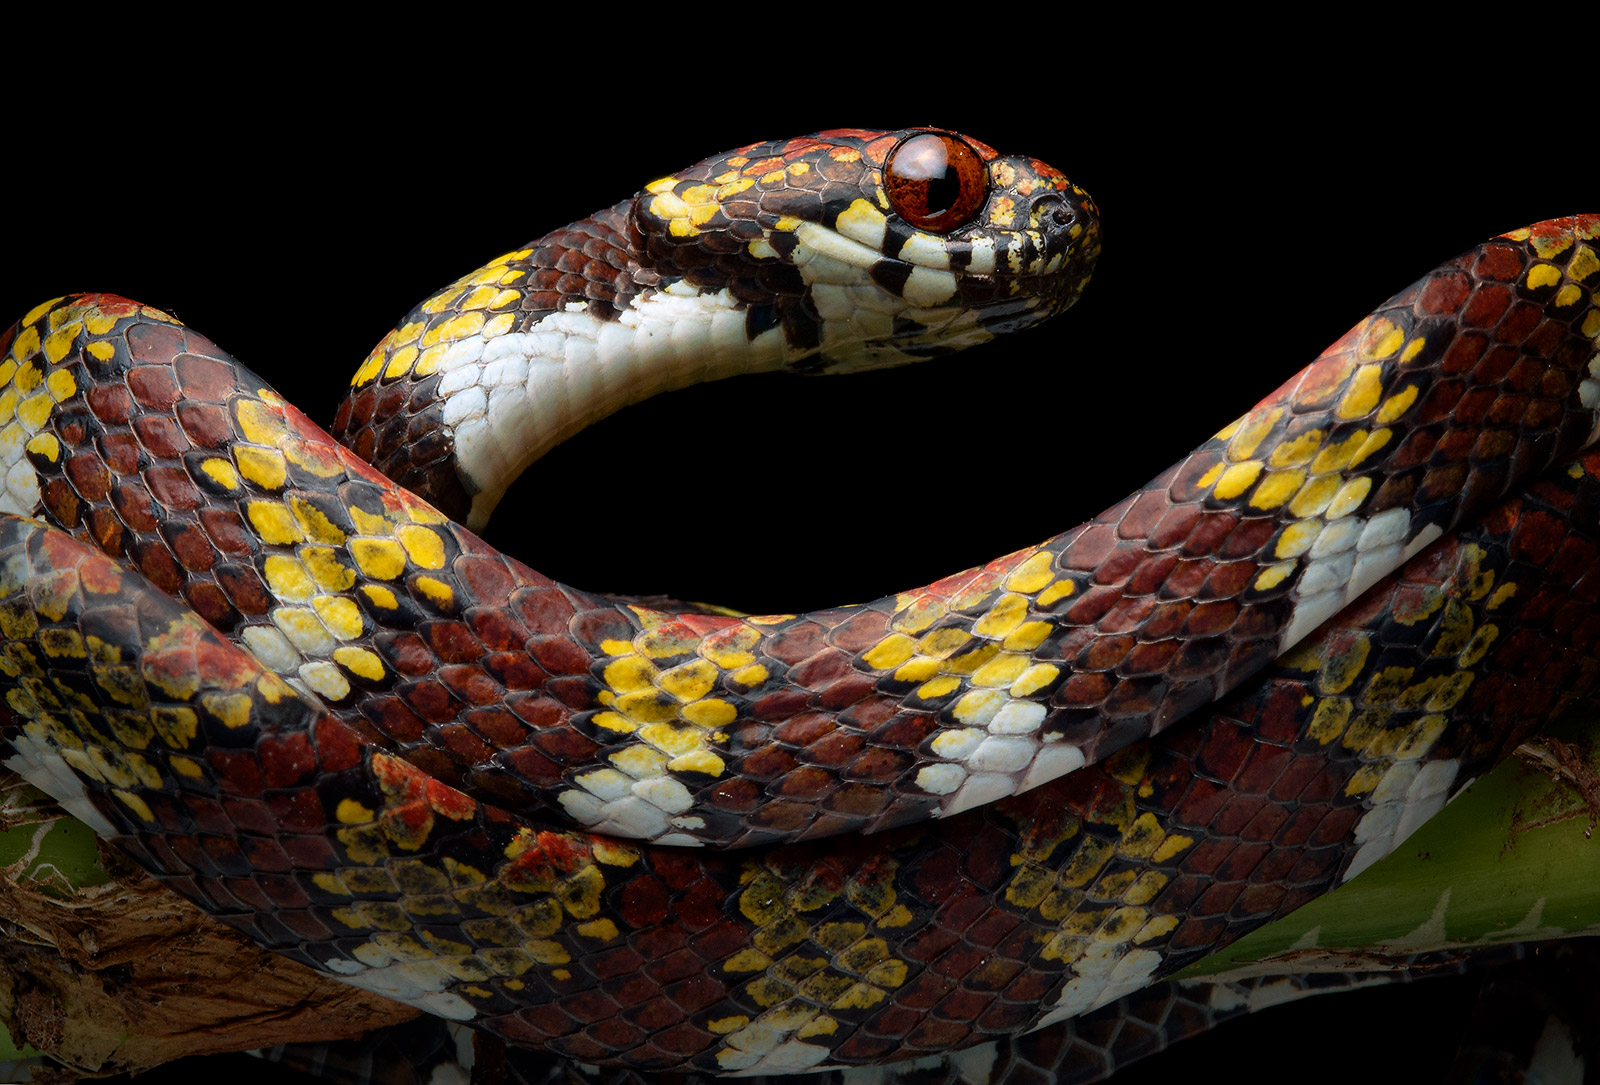 Close-up photo of the Marley’s Snail-eating Snake